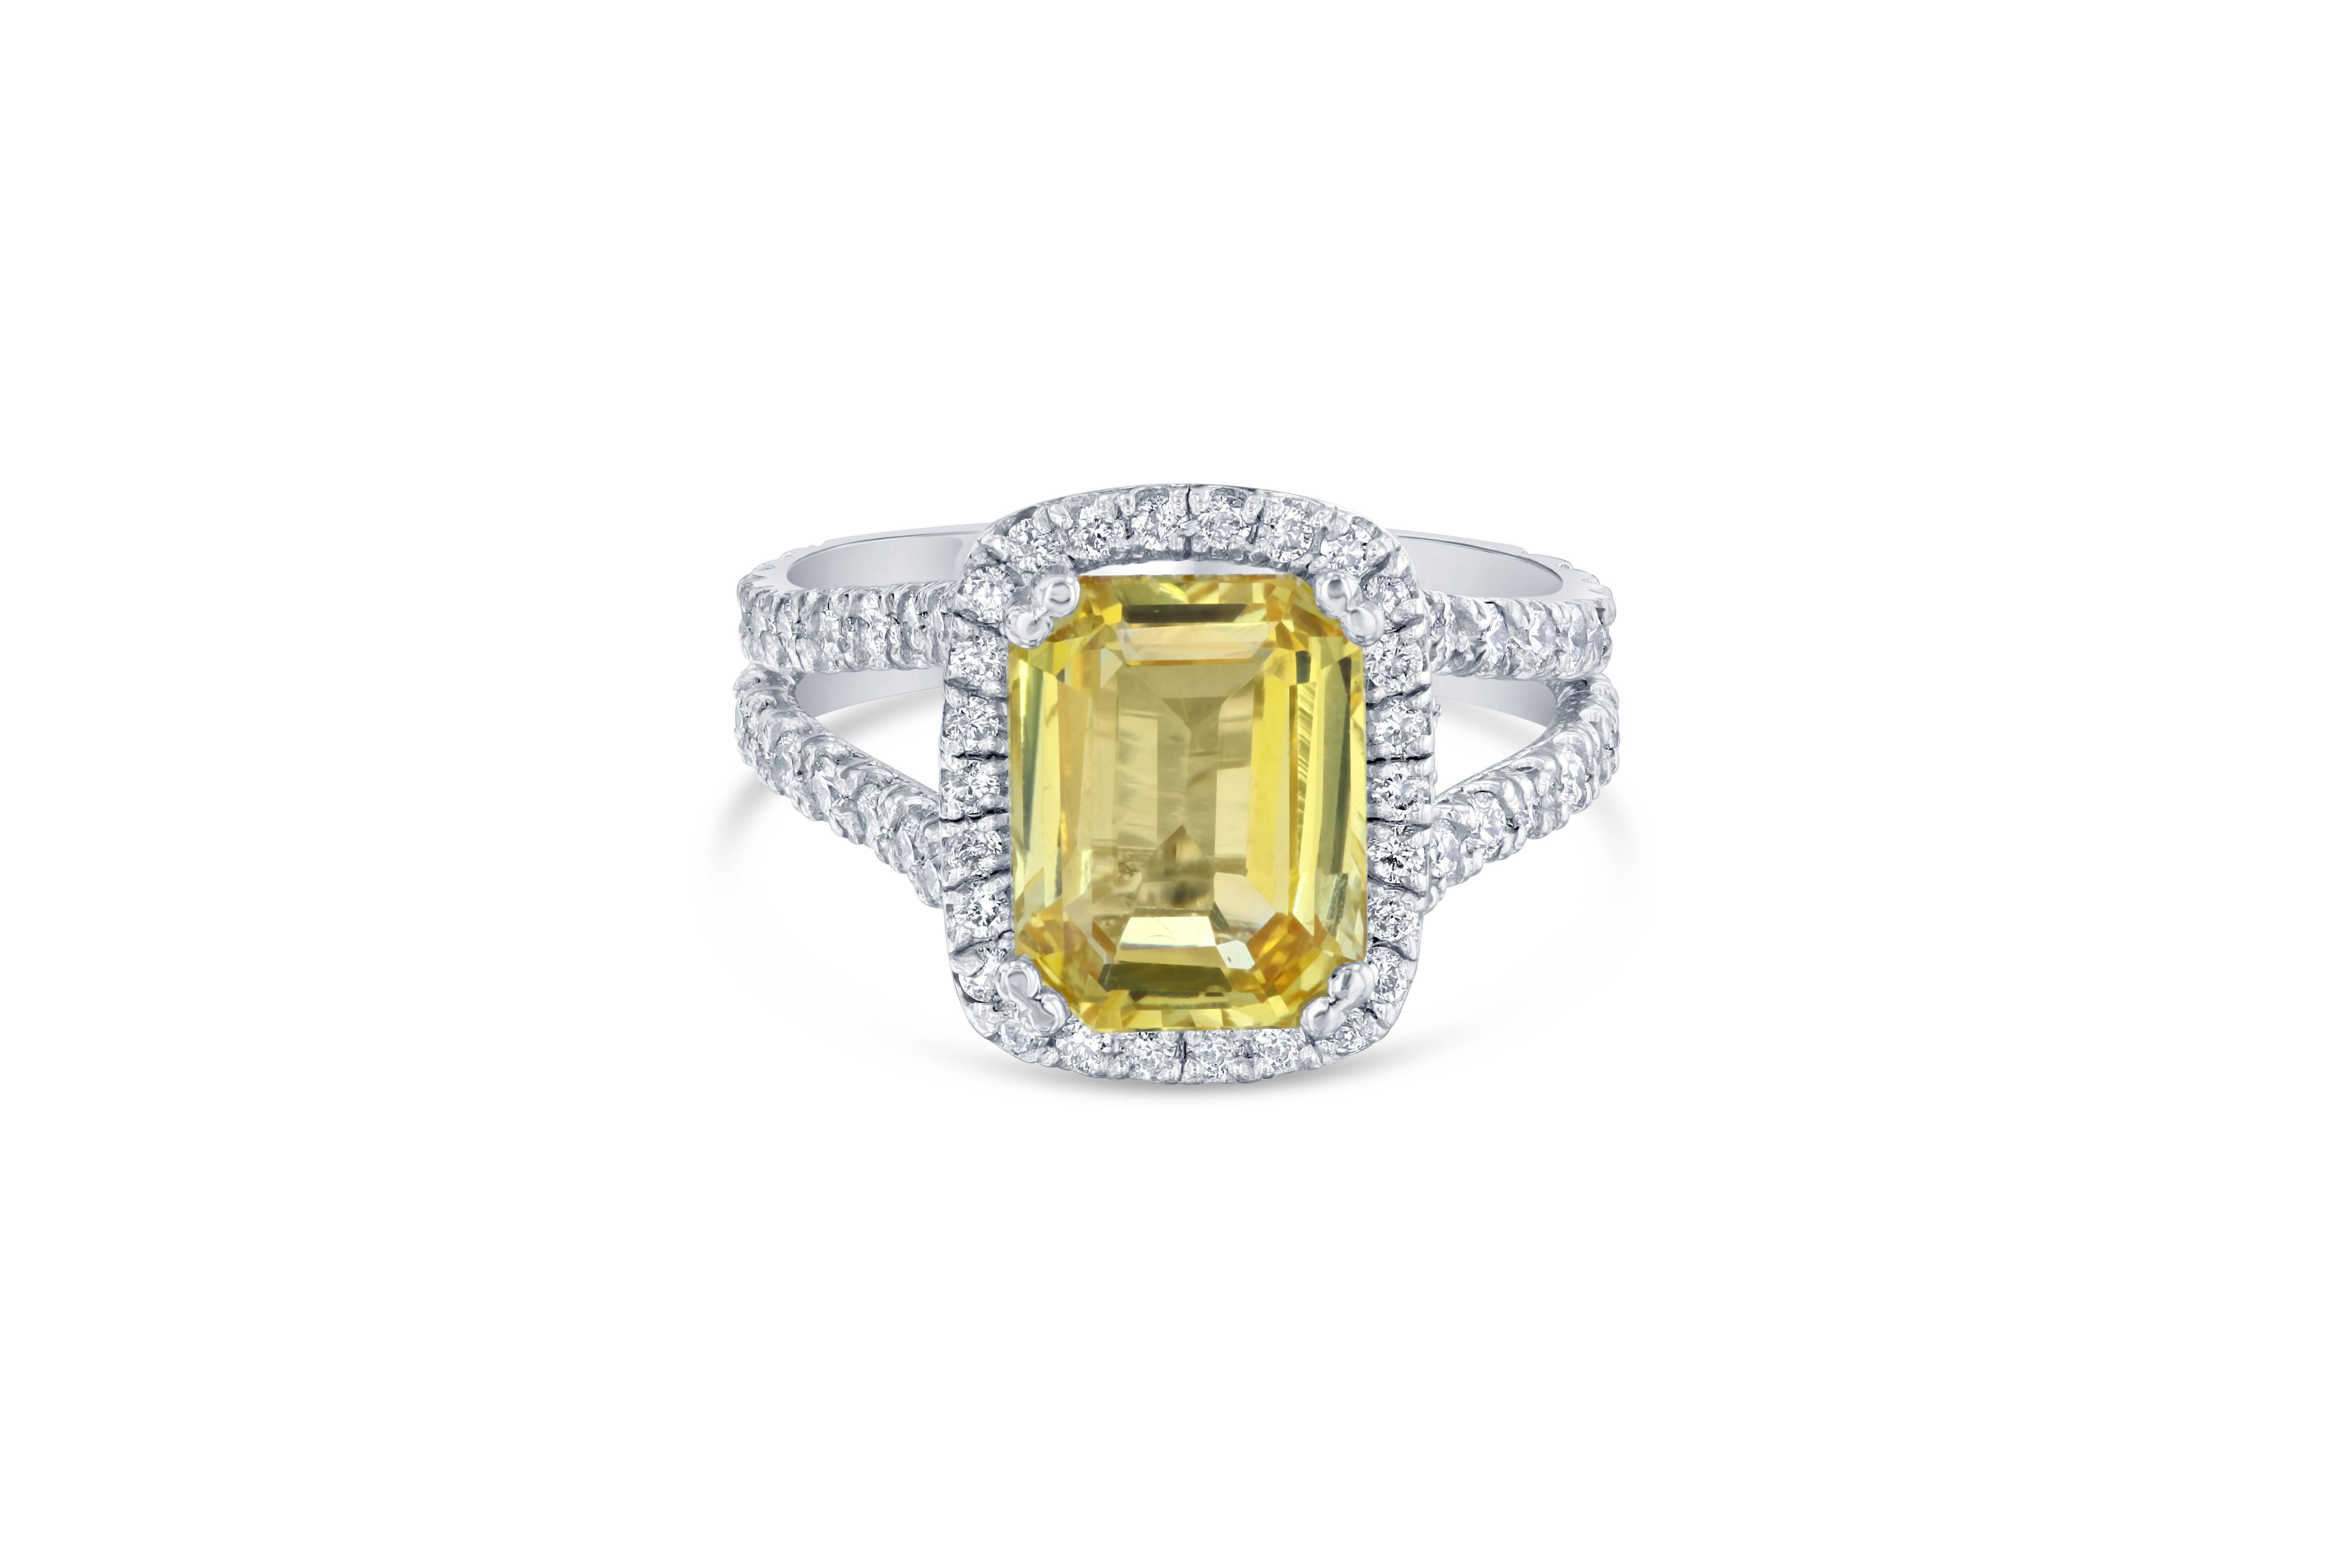 A gorgeous Yellow Sapphire Ring in a classic halo setting! This gorgeous Yellow Sapphire is a natural, no heat Sapphire that weighs 5.27 carats. 
It has a halo of 94 Round Cut Diamonds that weigh 1.23 carats (Clarity: VS2, Color: H). 
The total